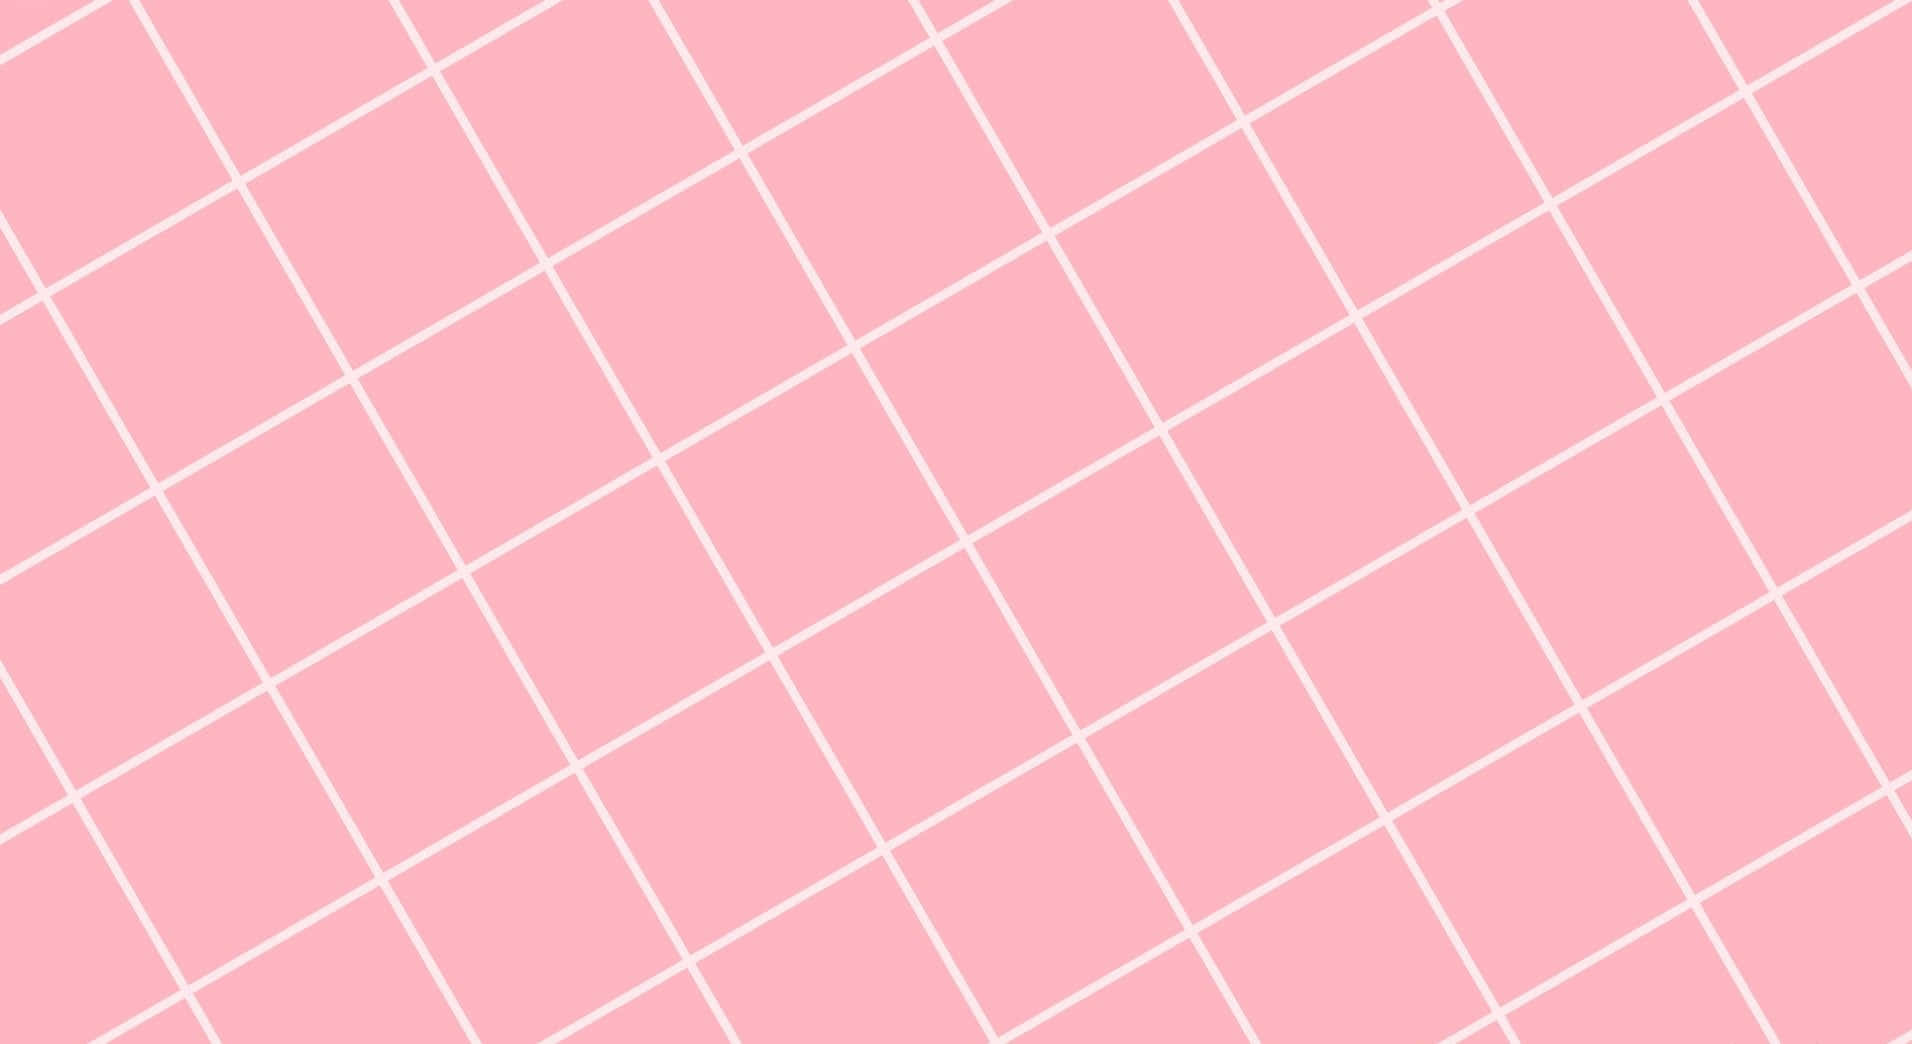 A Pink And White Tiled Pattern Wallpaper